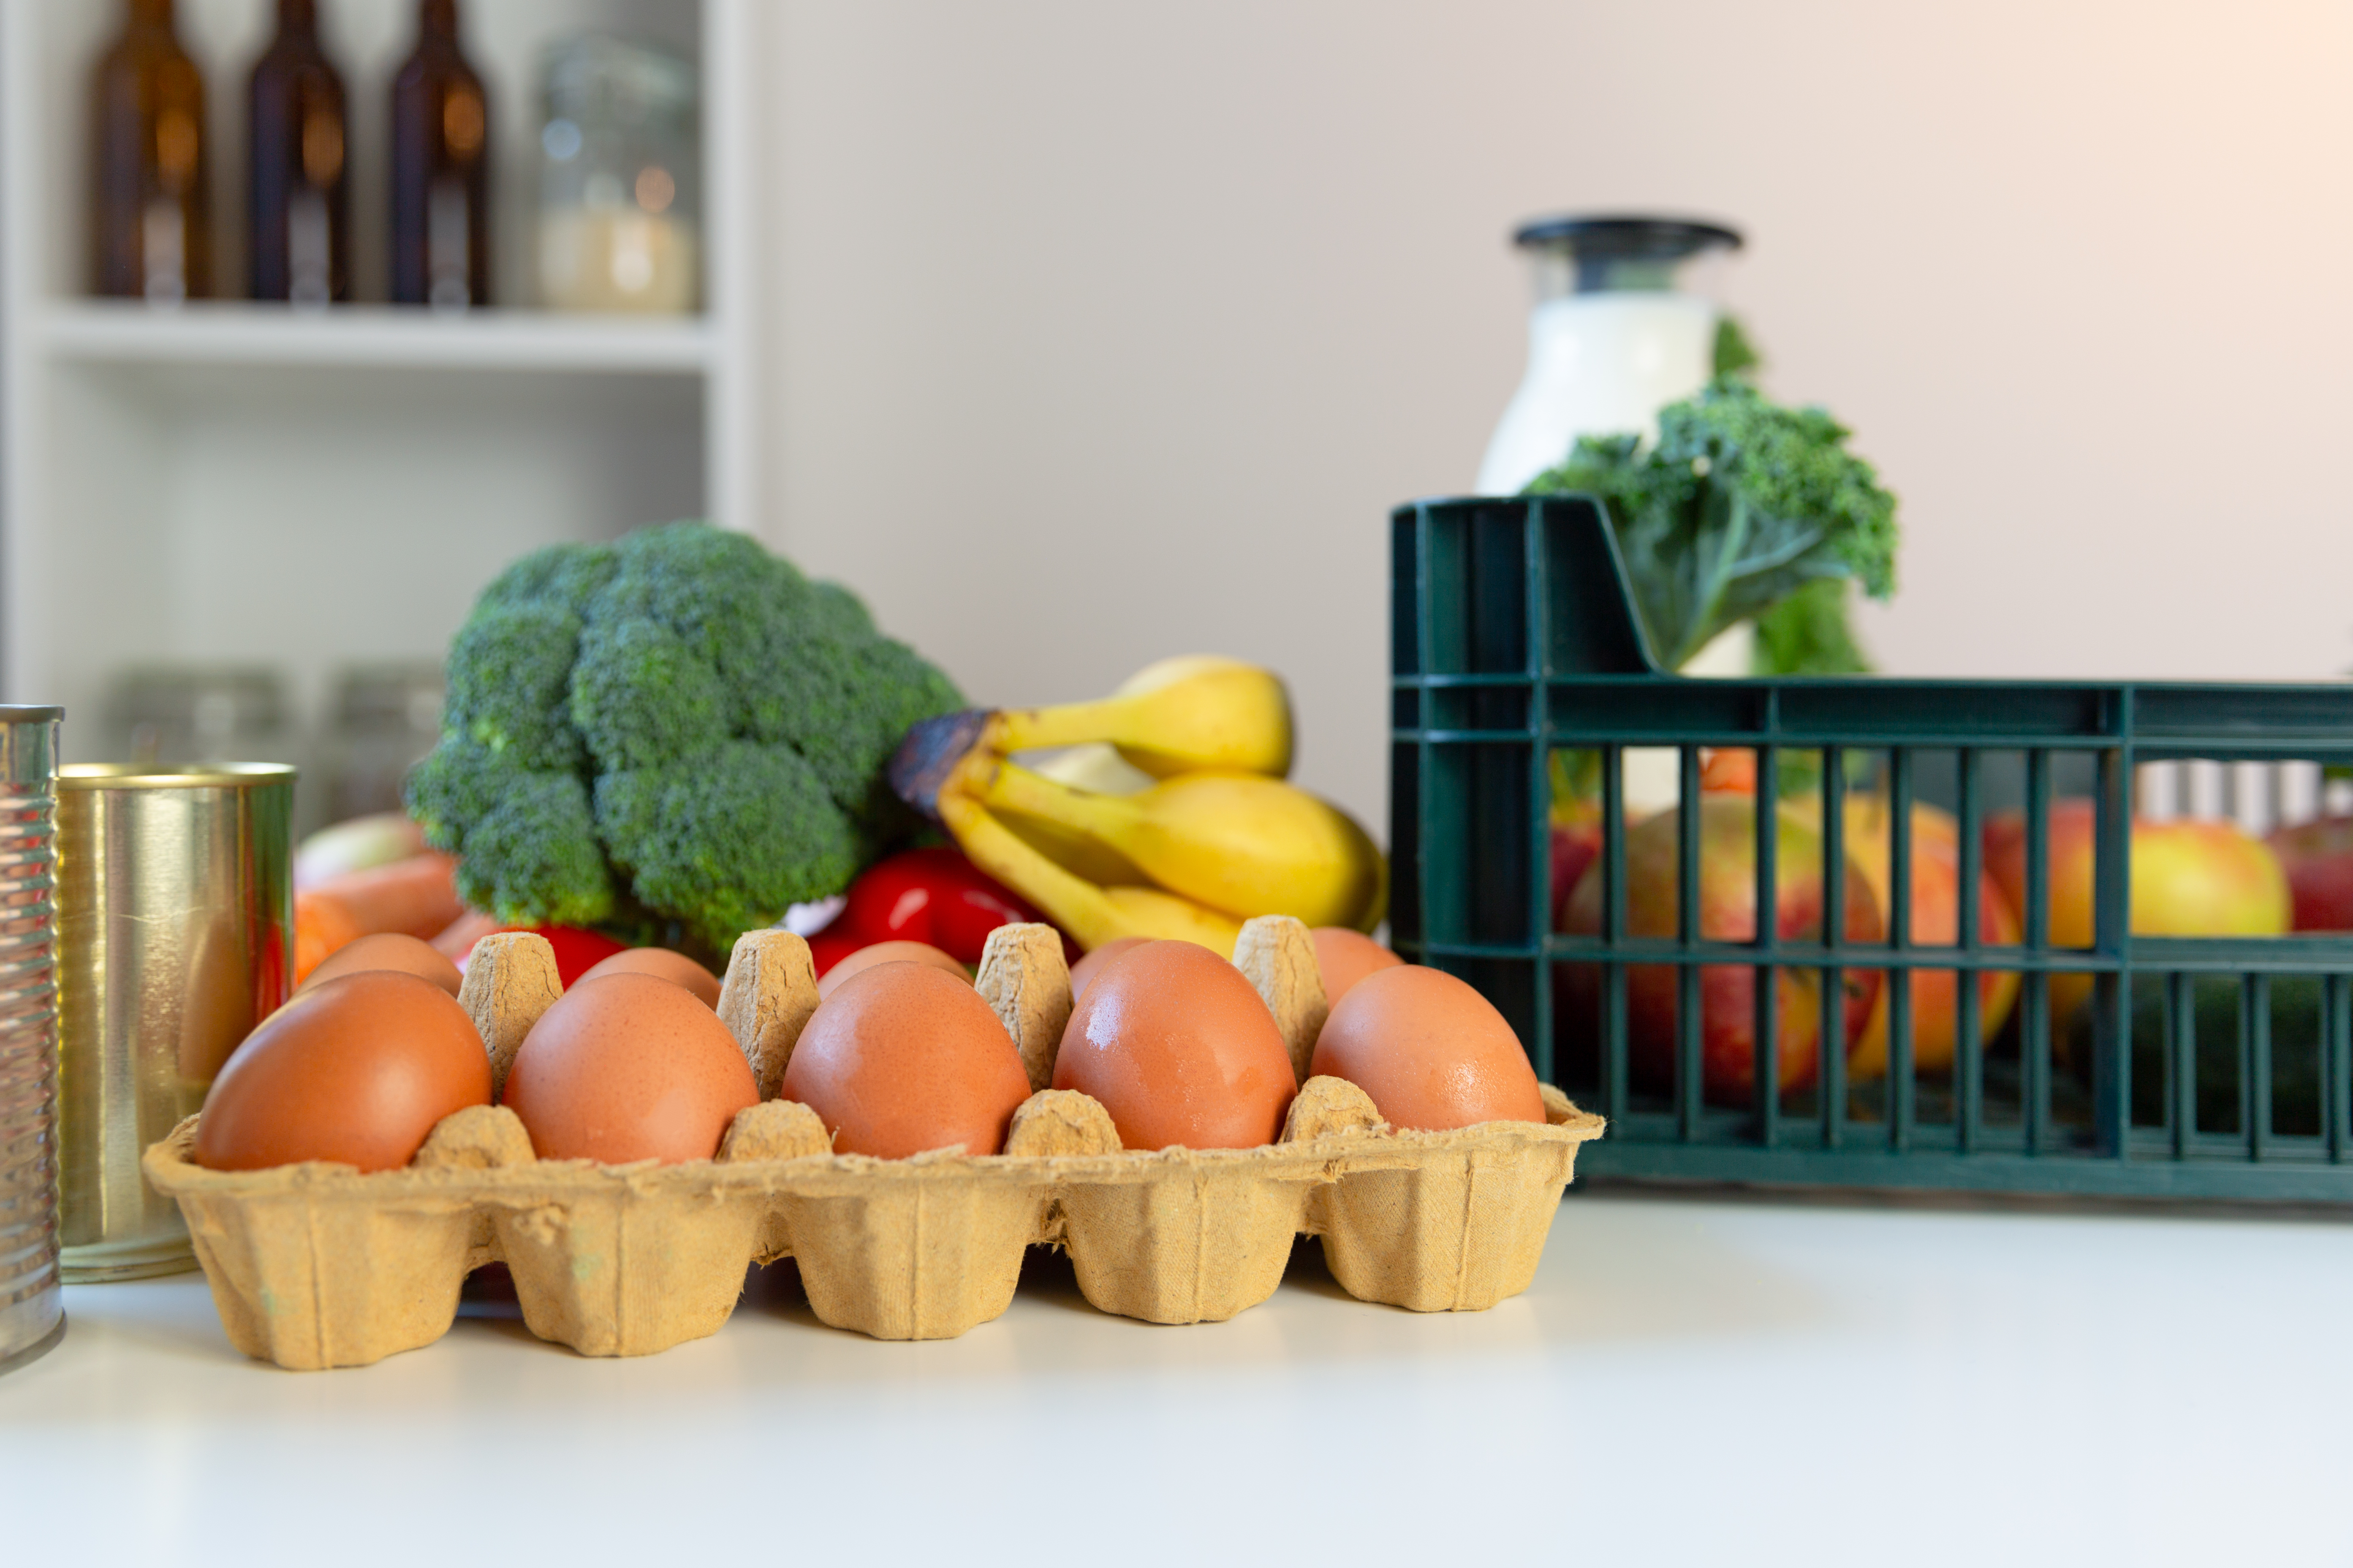 Fresh healthy groceries and vegetables from supermarket in green tray box. Food delivery service